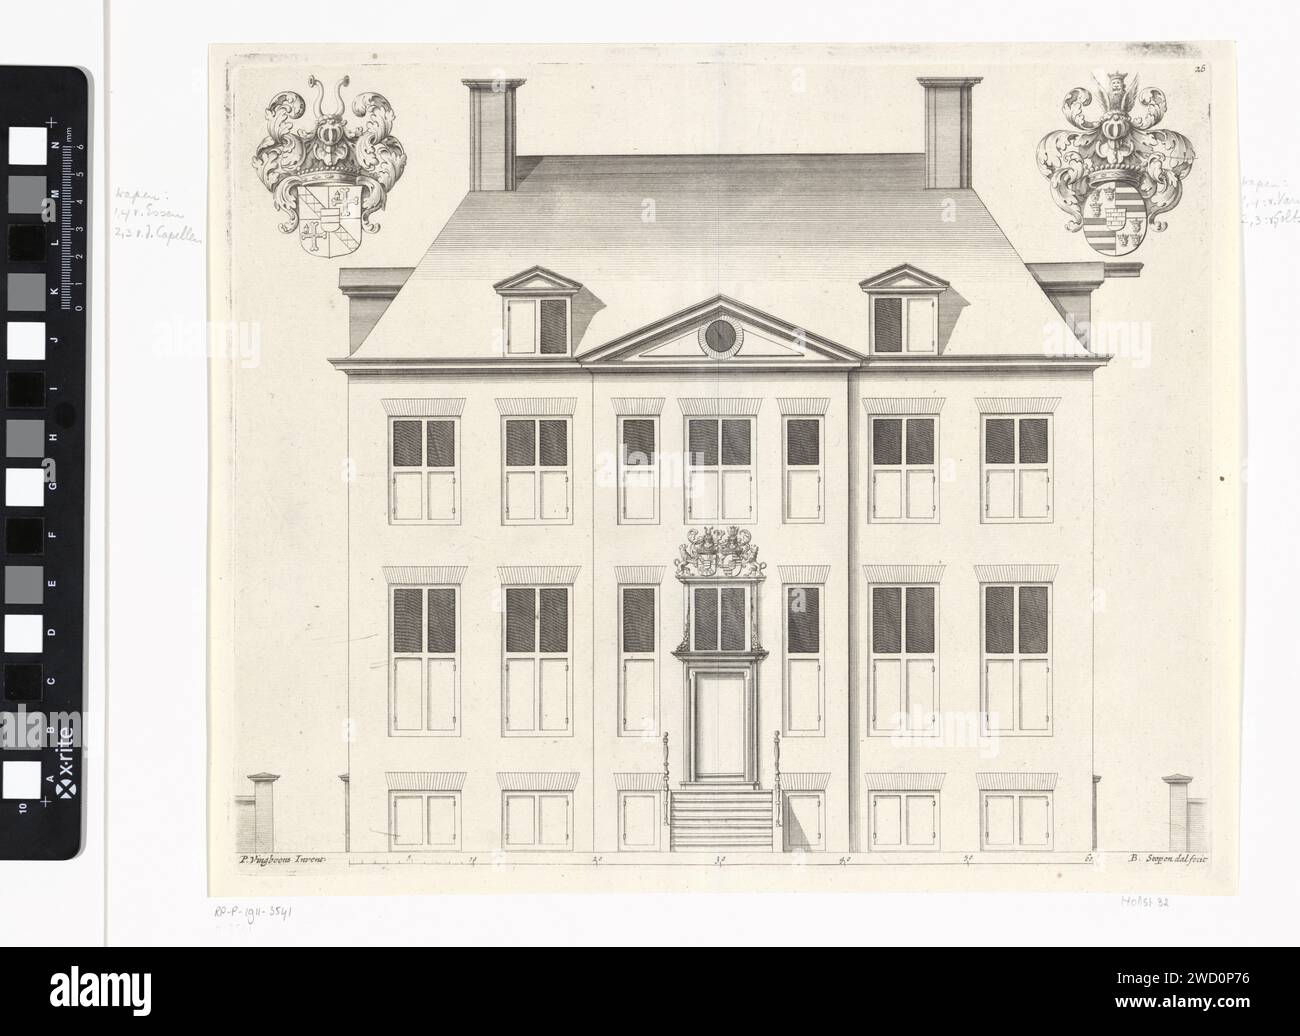 Facade of Huis Vanenburg near Putten, Bastiaen Stopendael, after Philips Vinckboons (II), 1674 print Facade of Huis Vanenburg near Putten, built by order of Hendrik van Essen in 1664. The house was designed by Philips Vingboons. Amsterdam paper etching / engraving exterior  architectural design or model Draw Stock Photo